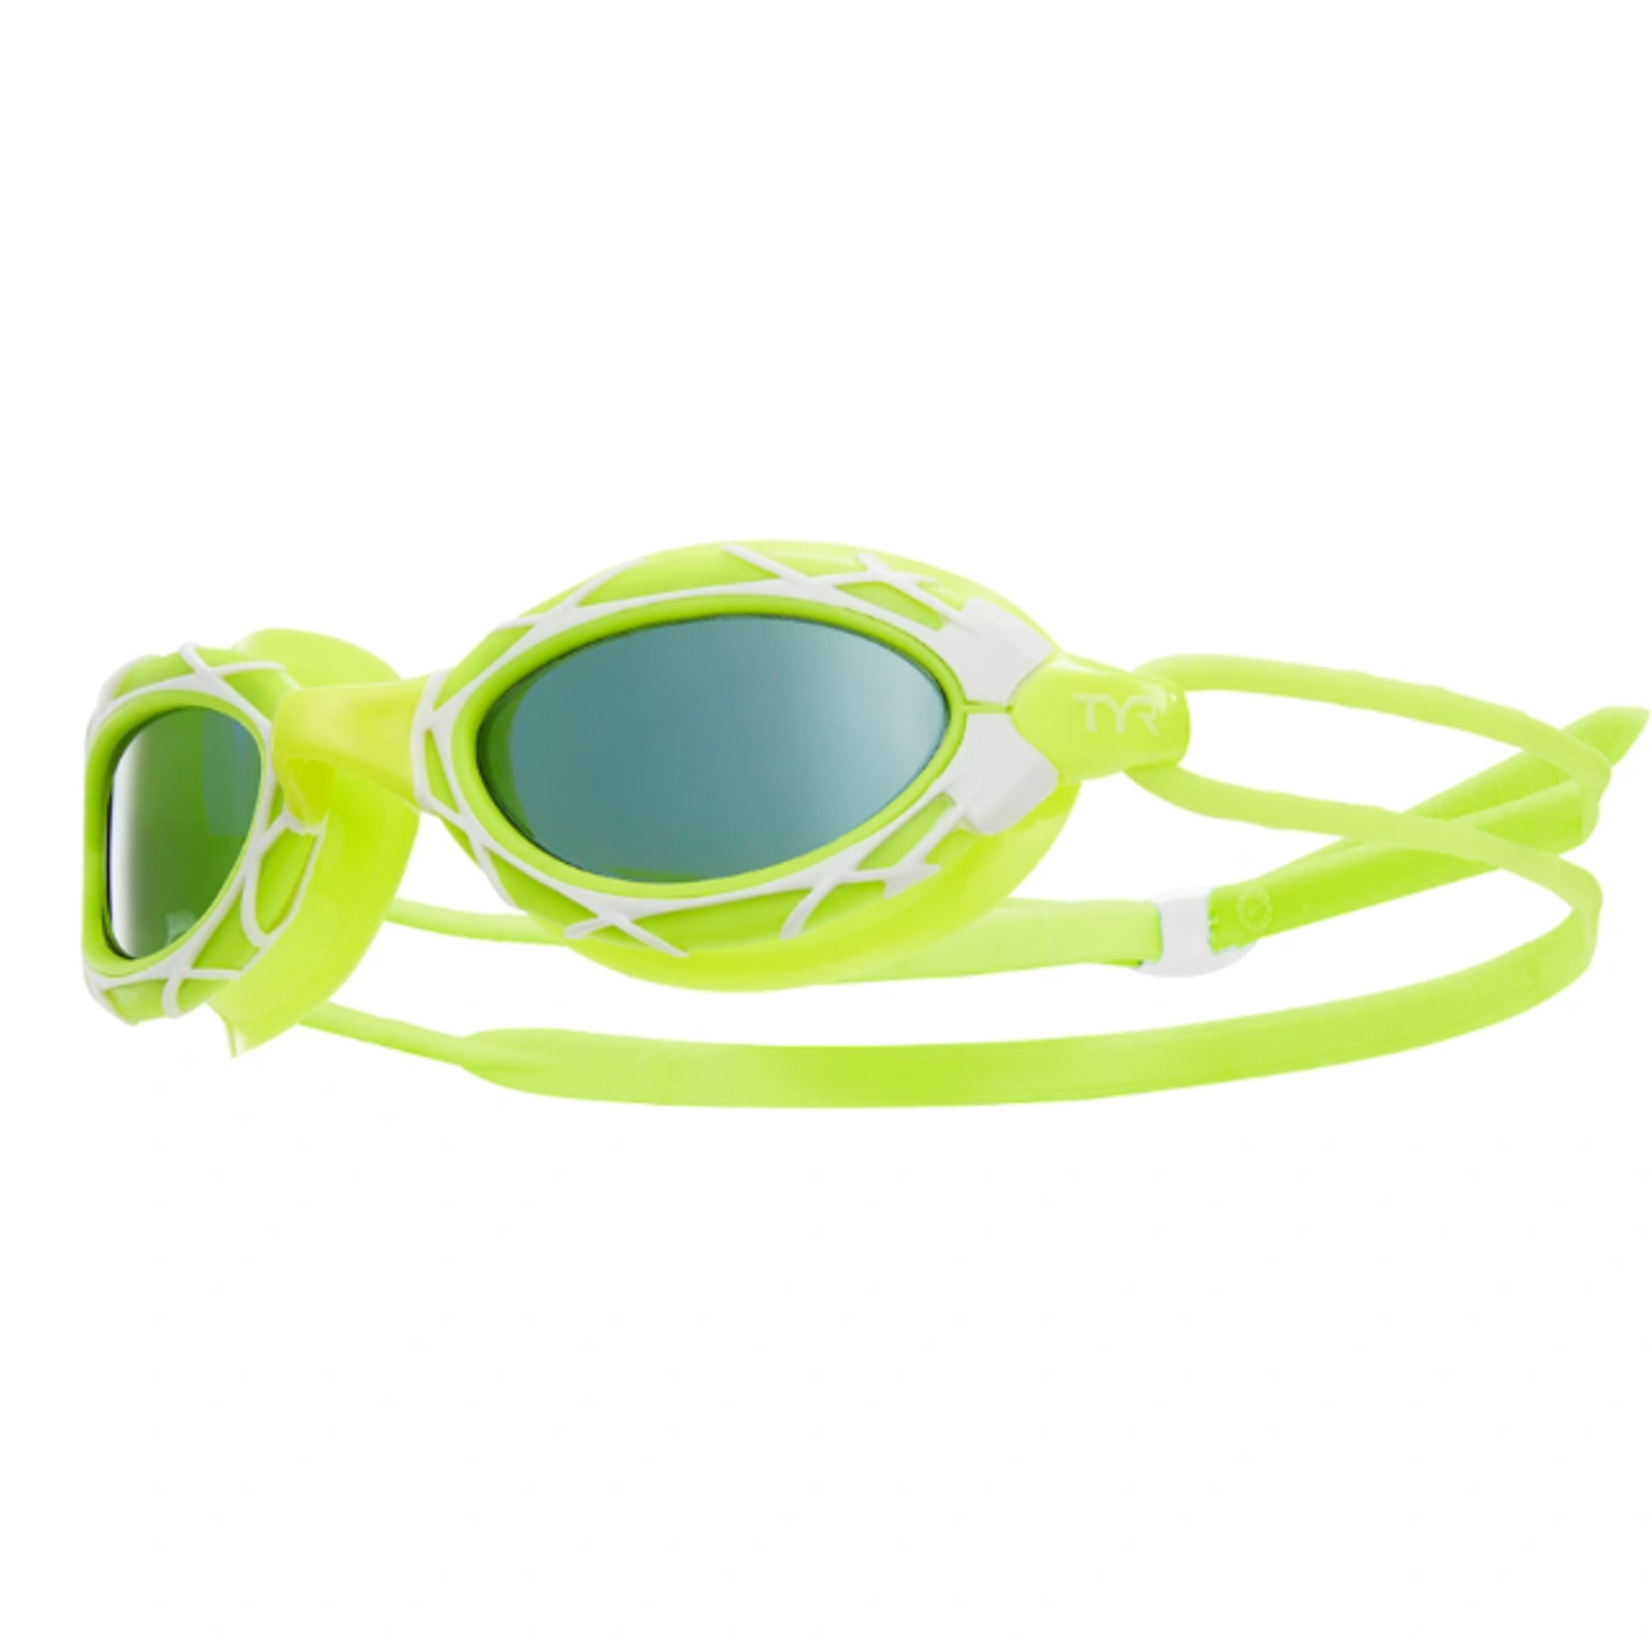 TYR TYR NANO-FIT NEST PRO GOGGLES